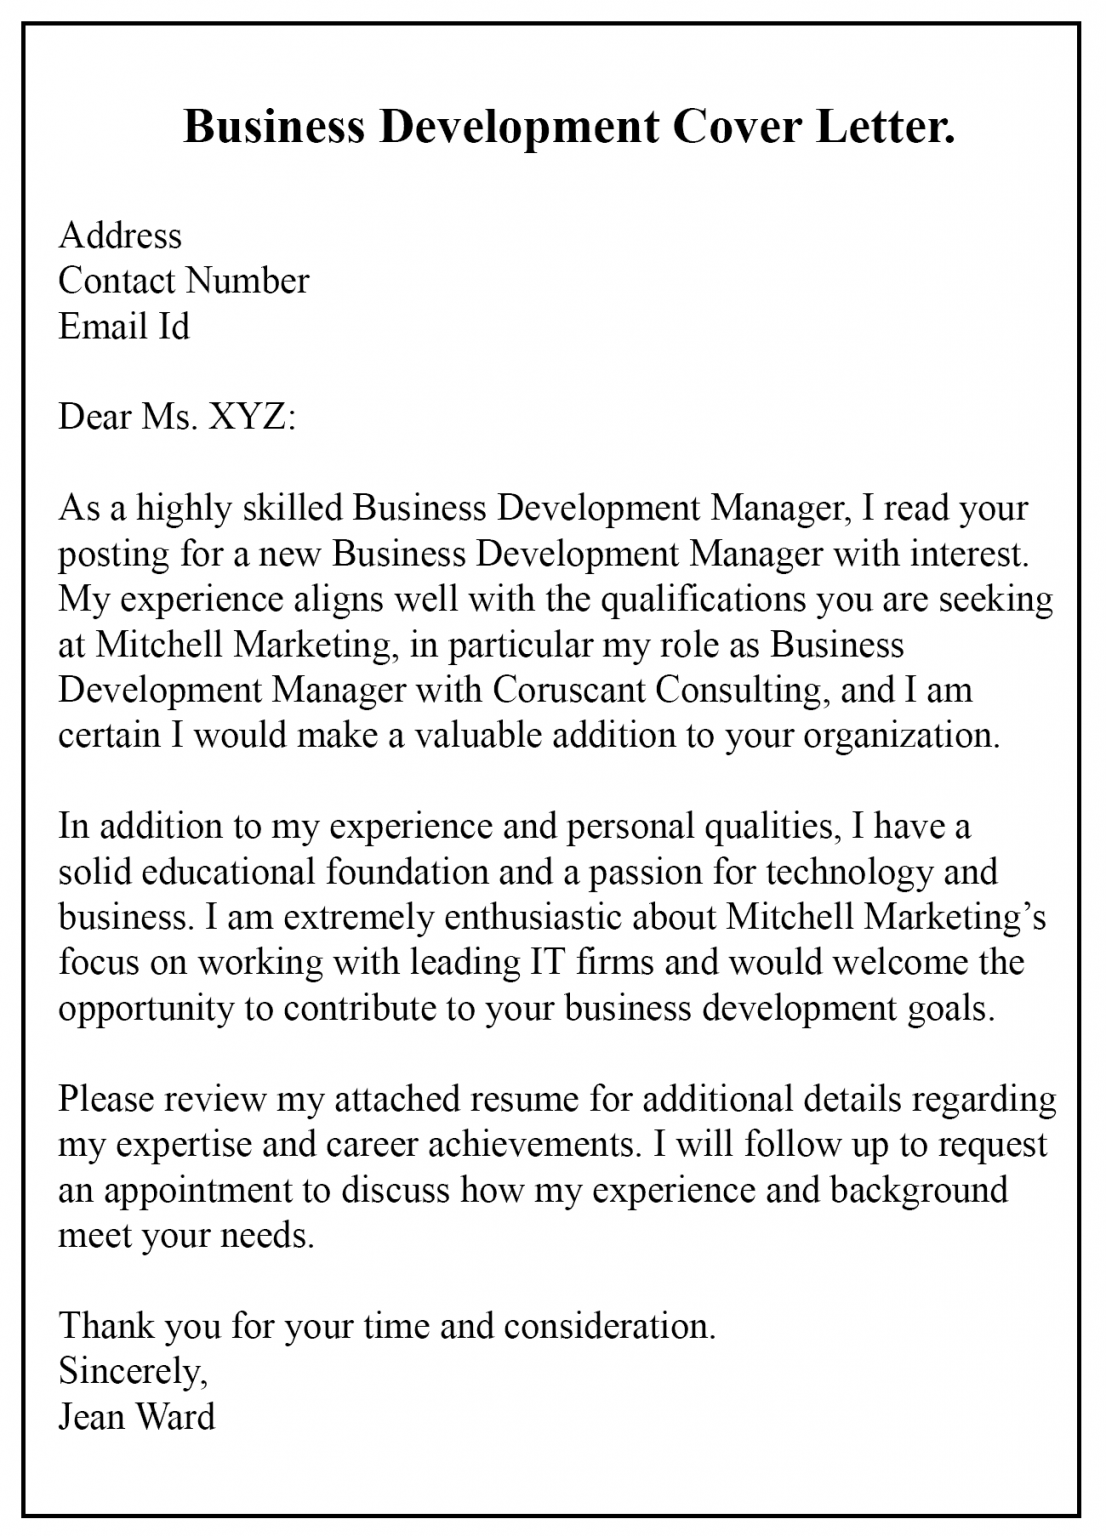 good business development manager cover letter